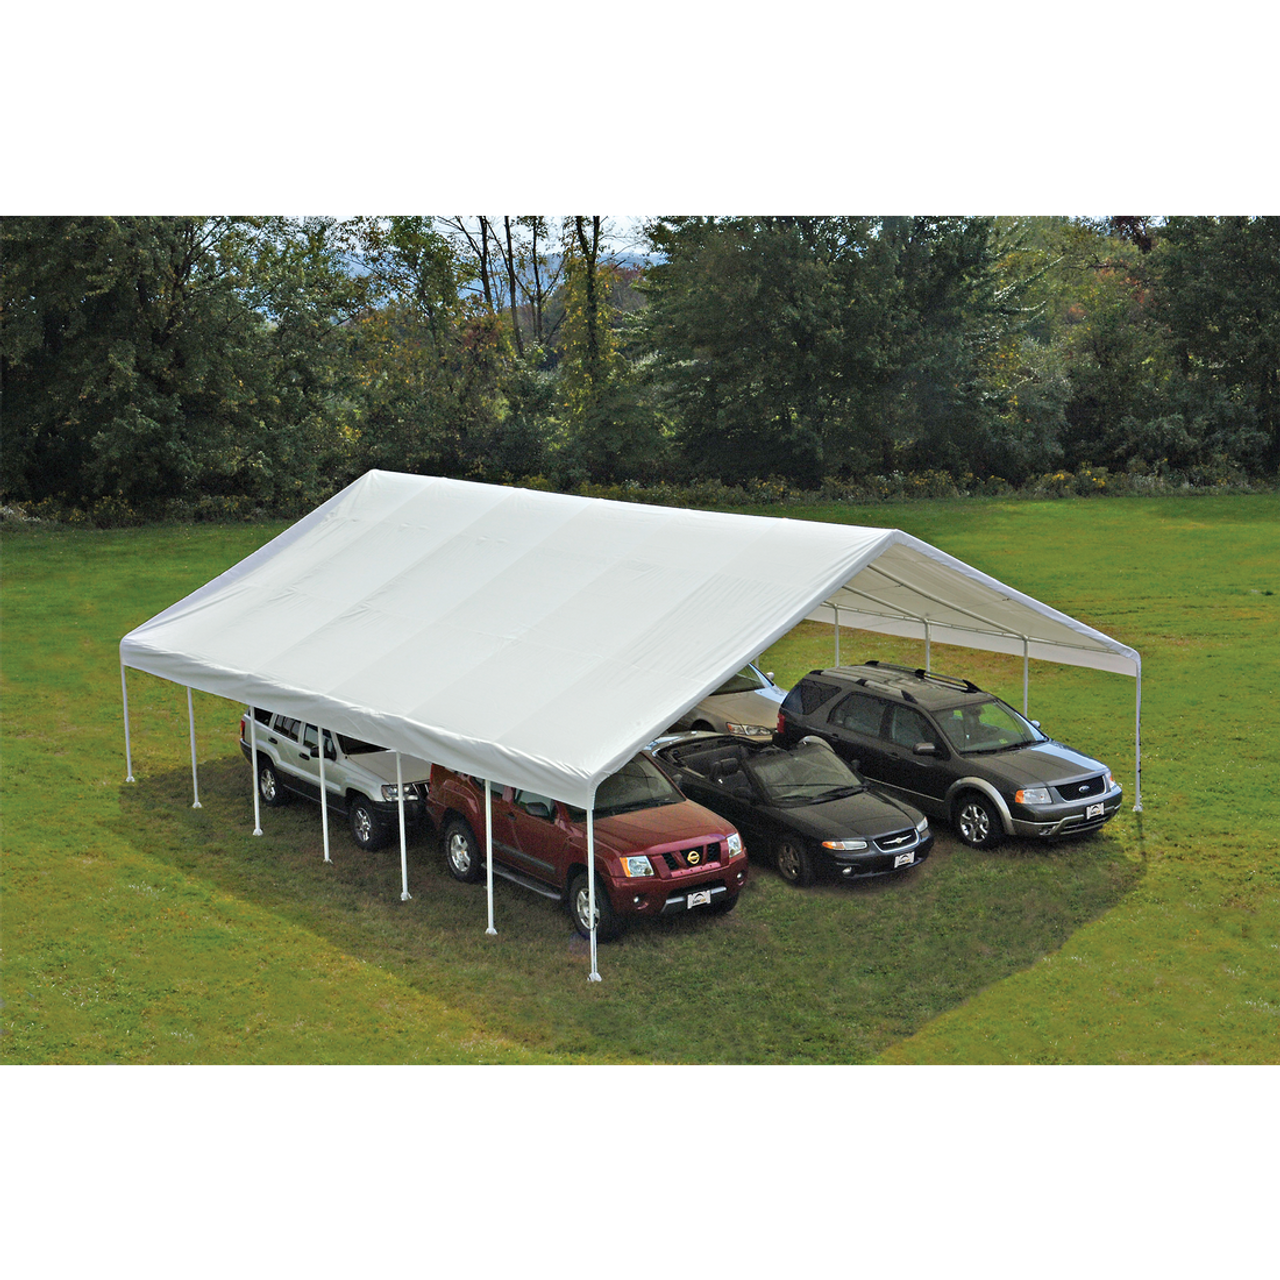 Replacement Valance Canopy Cover - 30' x 40